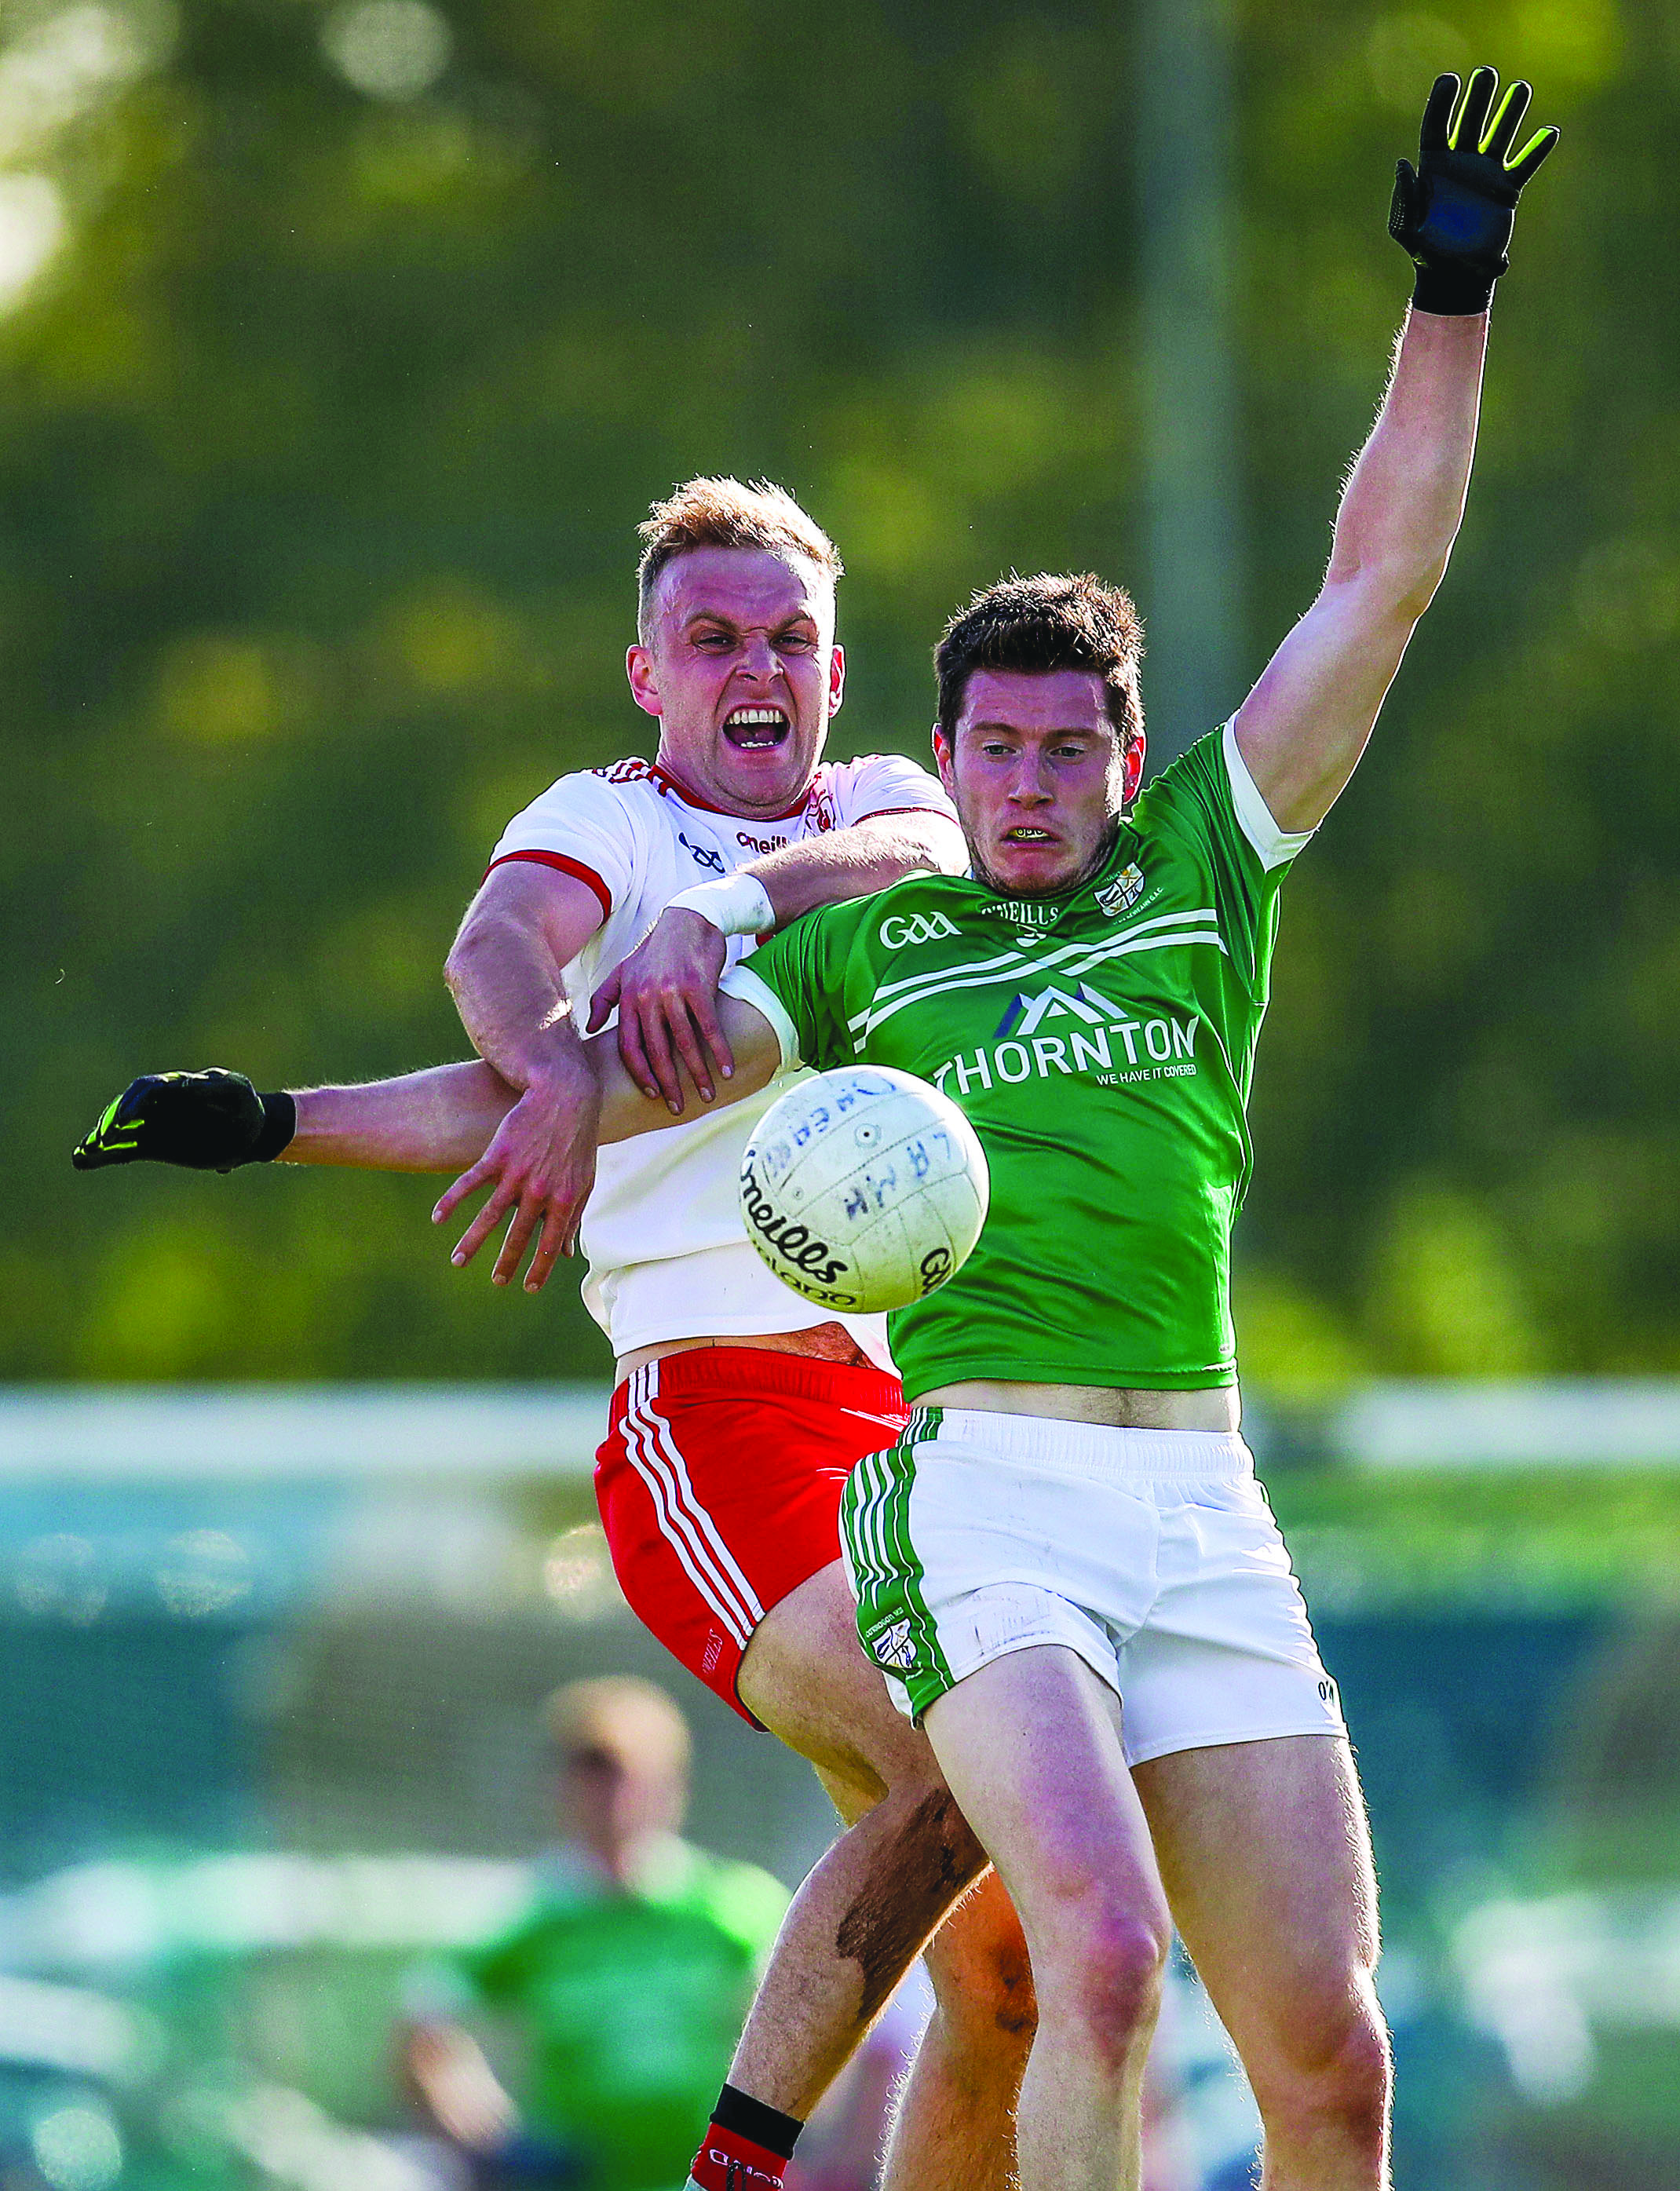 Lámh Dhearg’s Marc Jordan - pictured in action against Cargin in the 2019 Antrim SFC final - revealed his absence from last year’s county semi-final against the Toome outfit was due to him contracting Covid-19 that sapped his energy for the remainder of 2